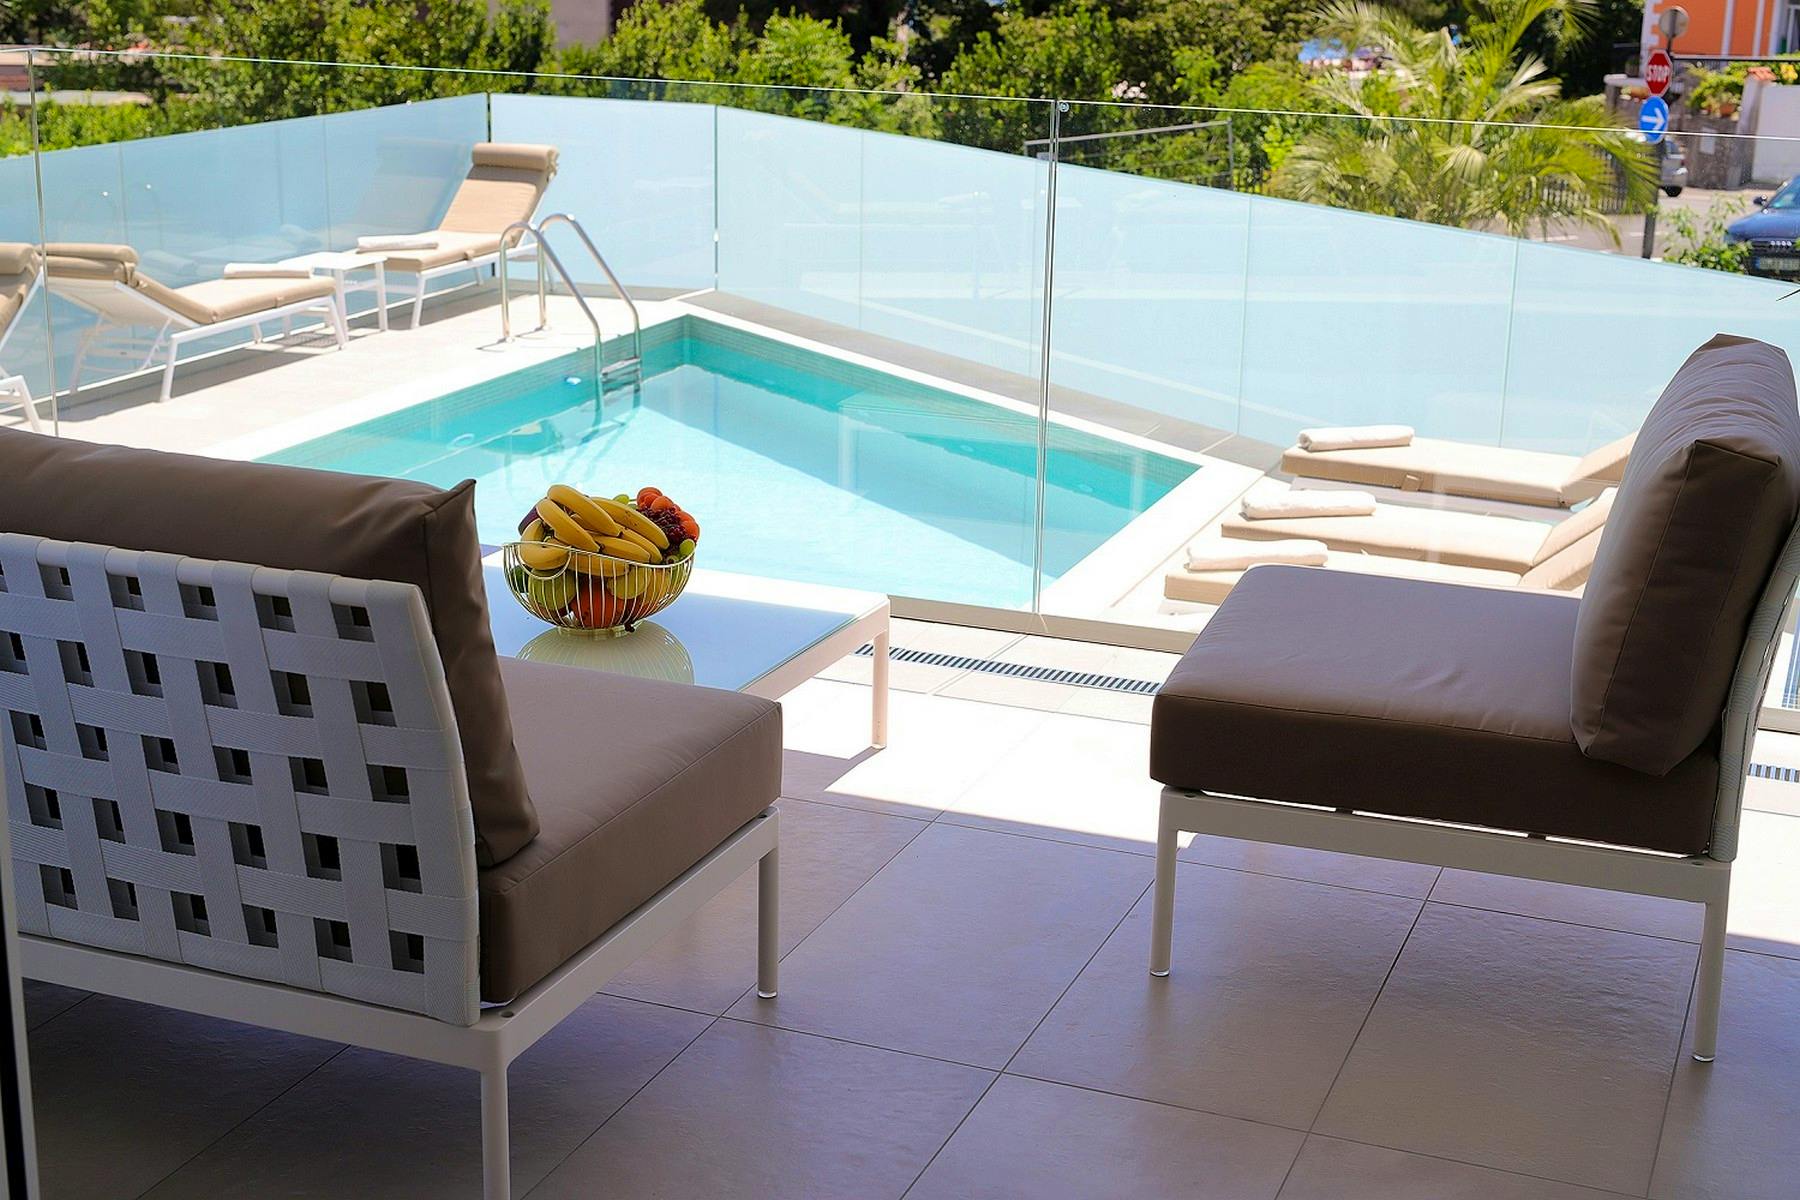 Swimming pool with sundeck and lounge area